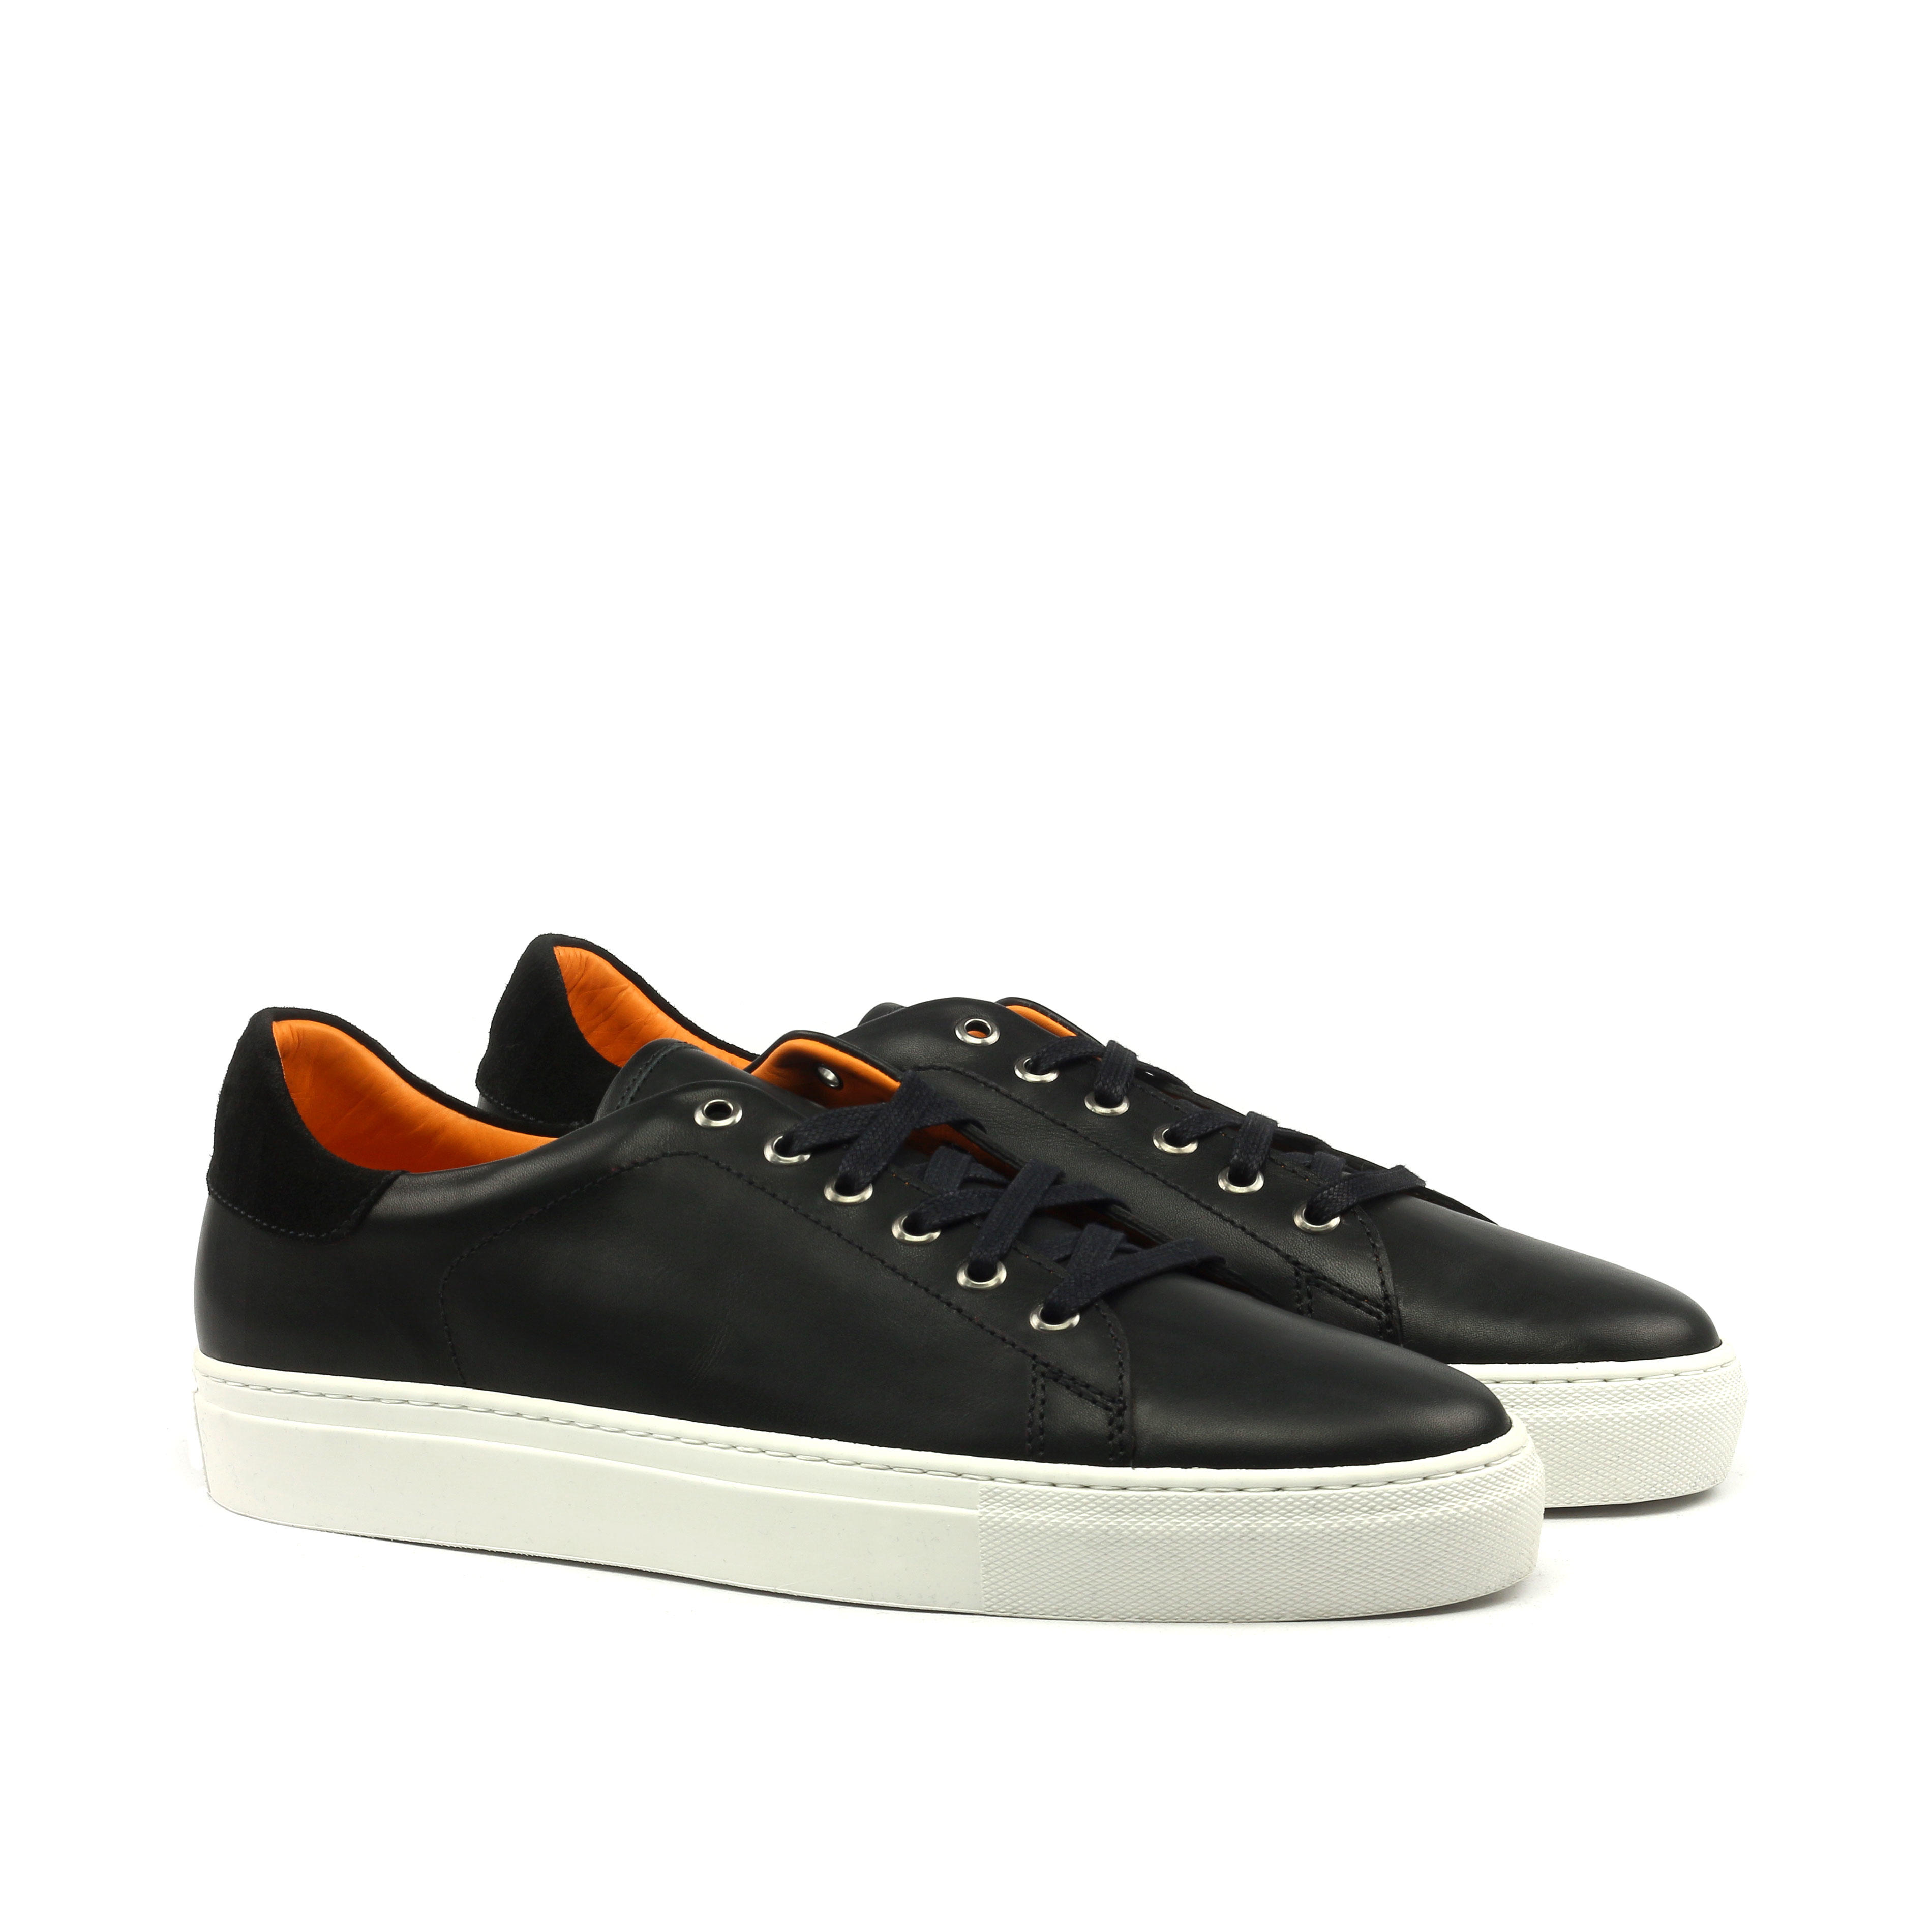 MANOR OF LONDON'The Perry' Painted Black Calfskin Tennis Trainer Luxury Custom Initials Monogrammed Front Side View